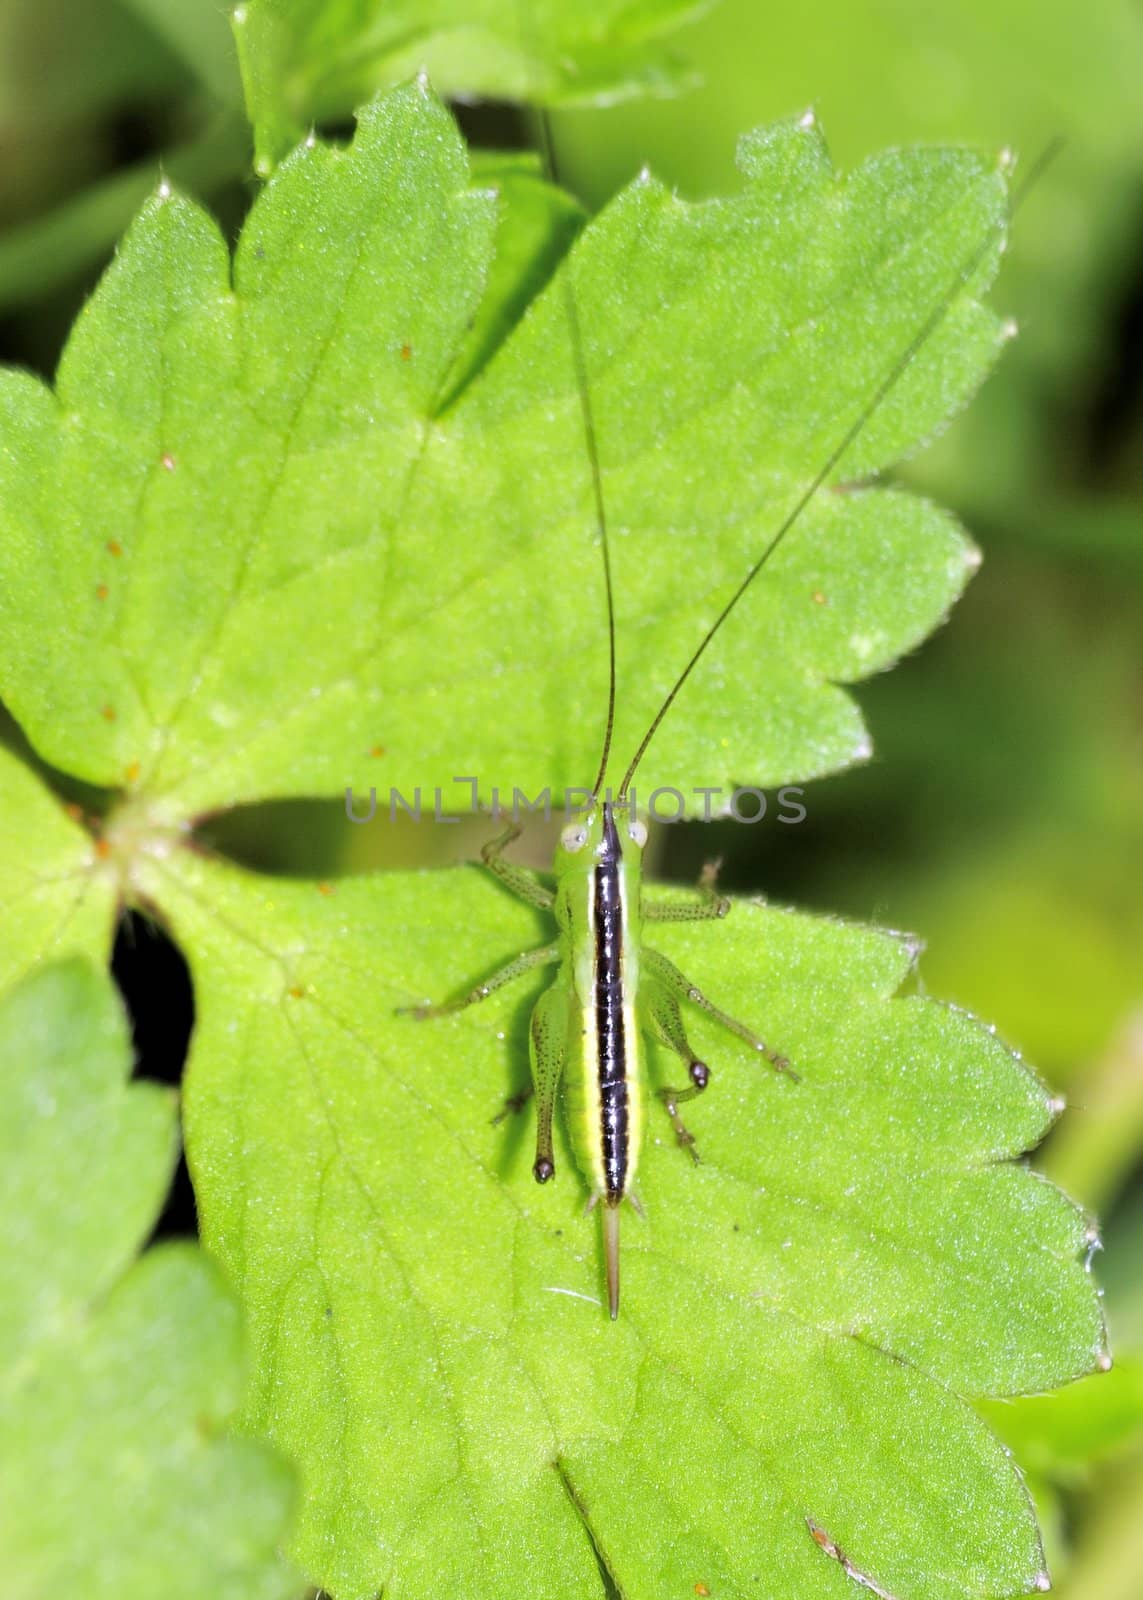 A tree cricket nymph perched on a plant leaf.